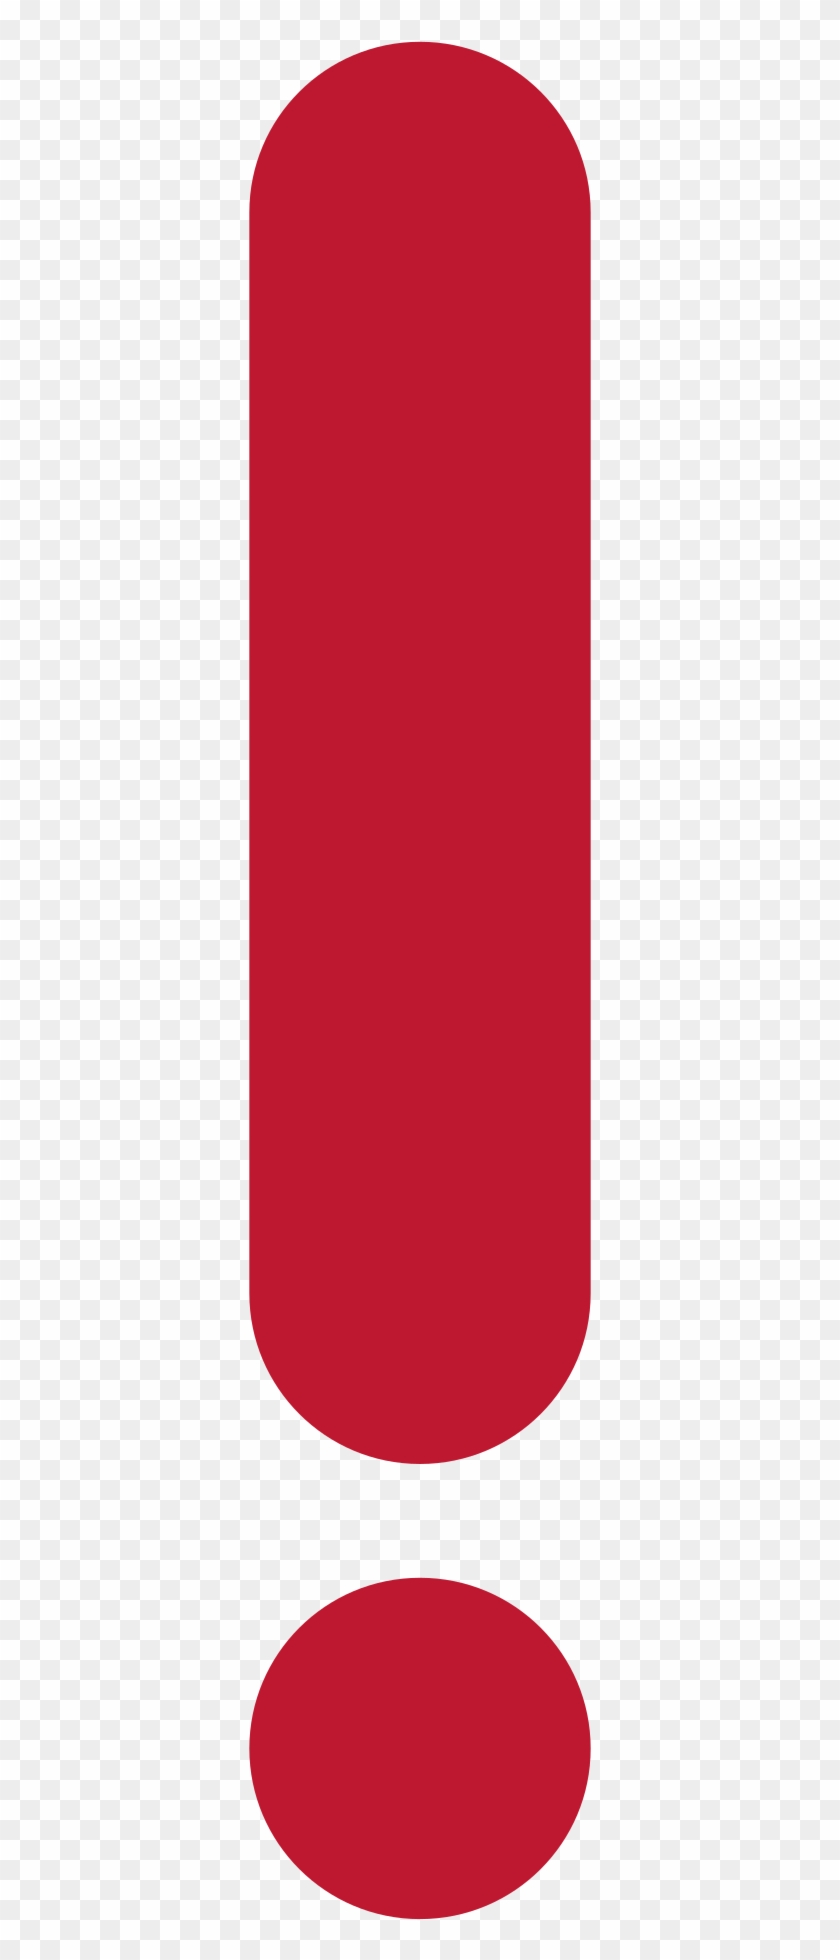 Red Exclamation Mark Symbol